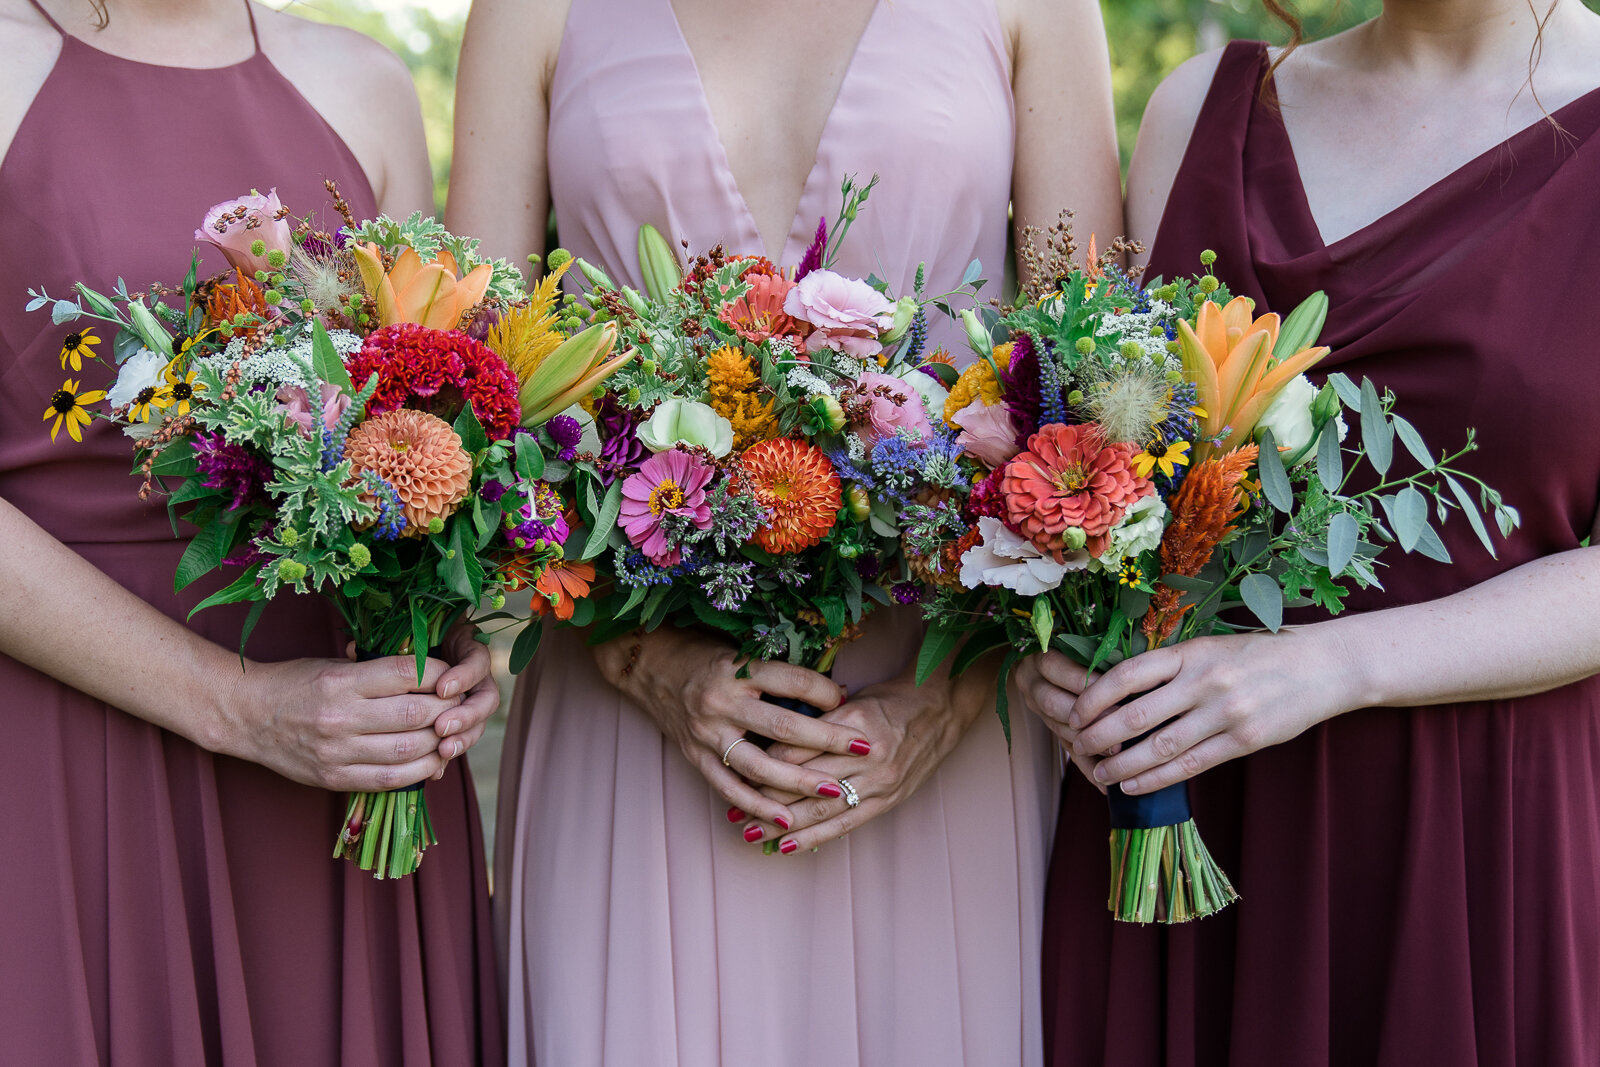 Bridesmaid bouquets by Urban Buds in St. Louis, MO. Sustainable and farm-grown flowers